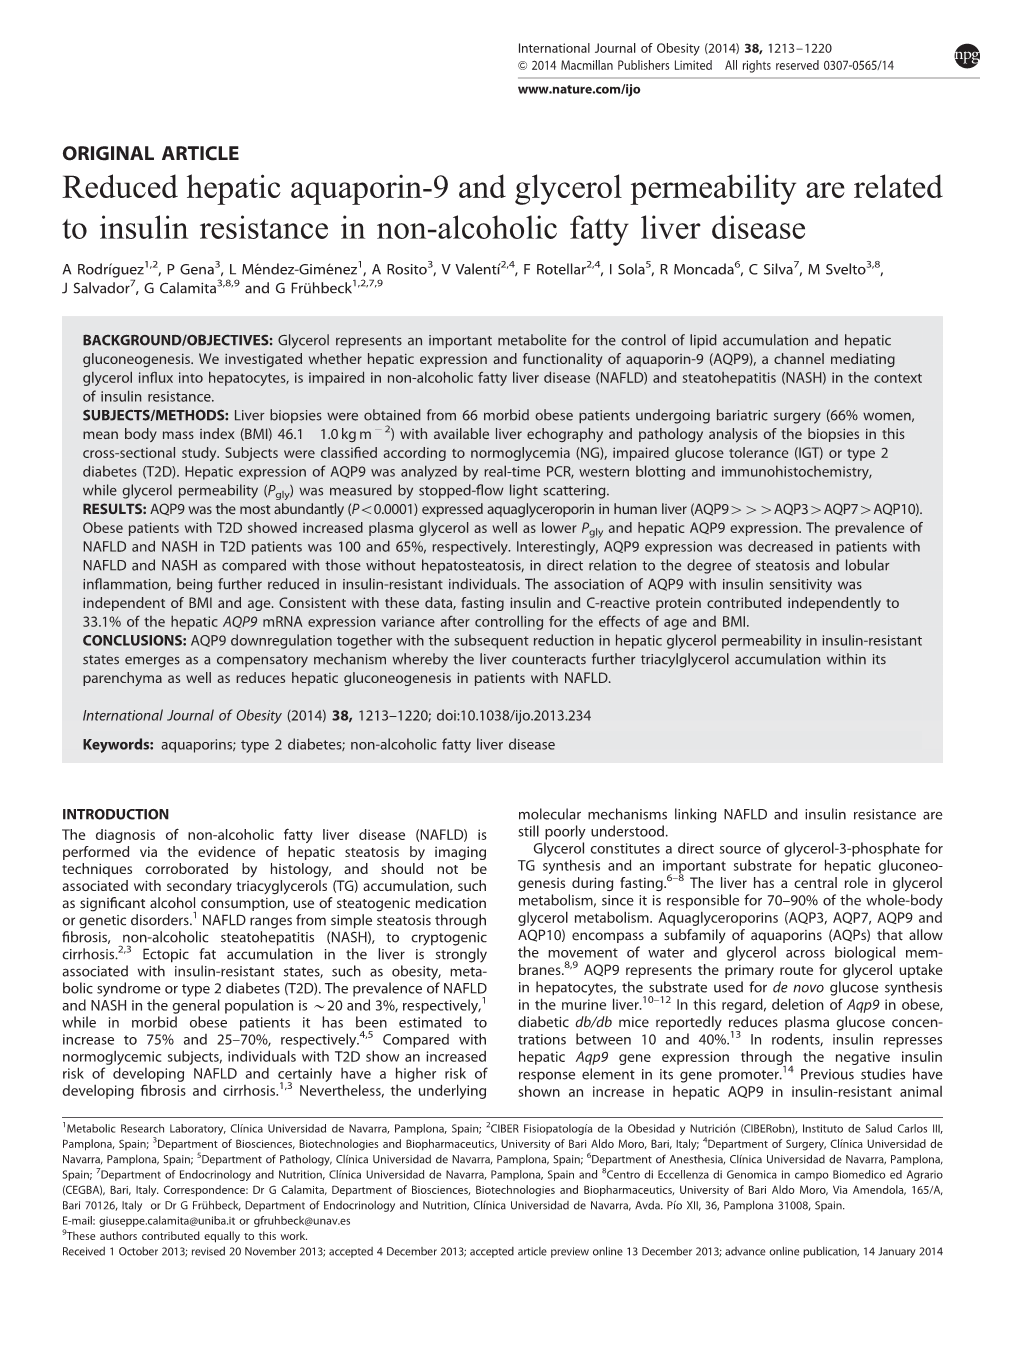 Reduced Hepatic Aquaporin-9 and Glycerol Permeability Are Related to Insulin Resistance in Non-Alcoholic Fatty Liver Disease